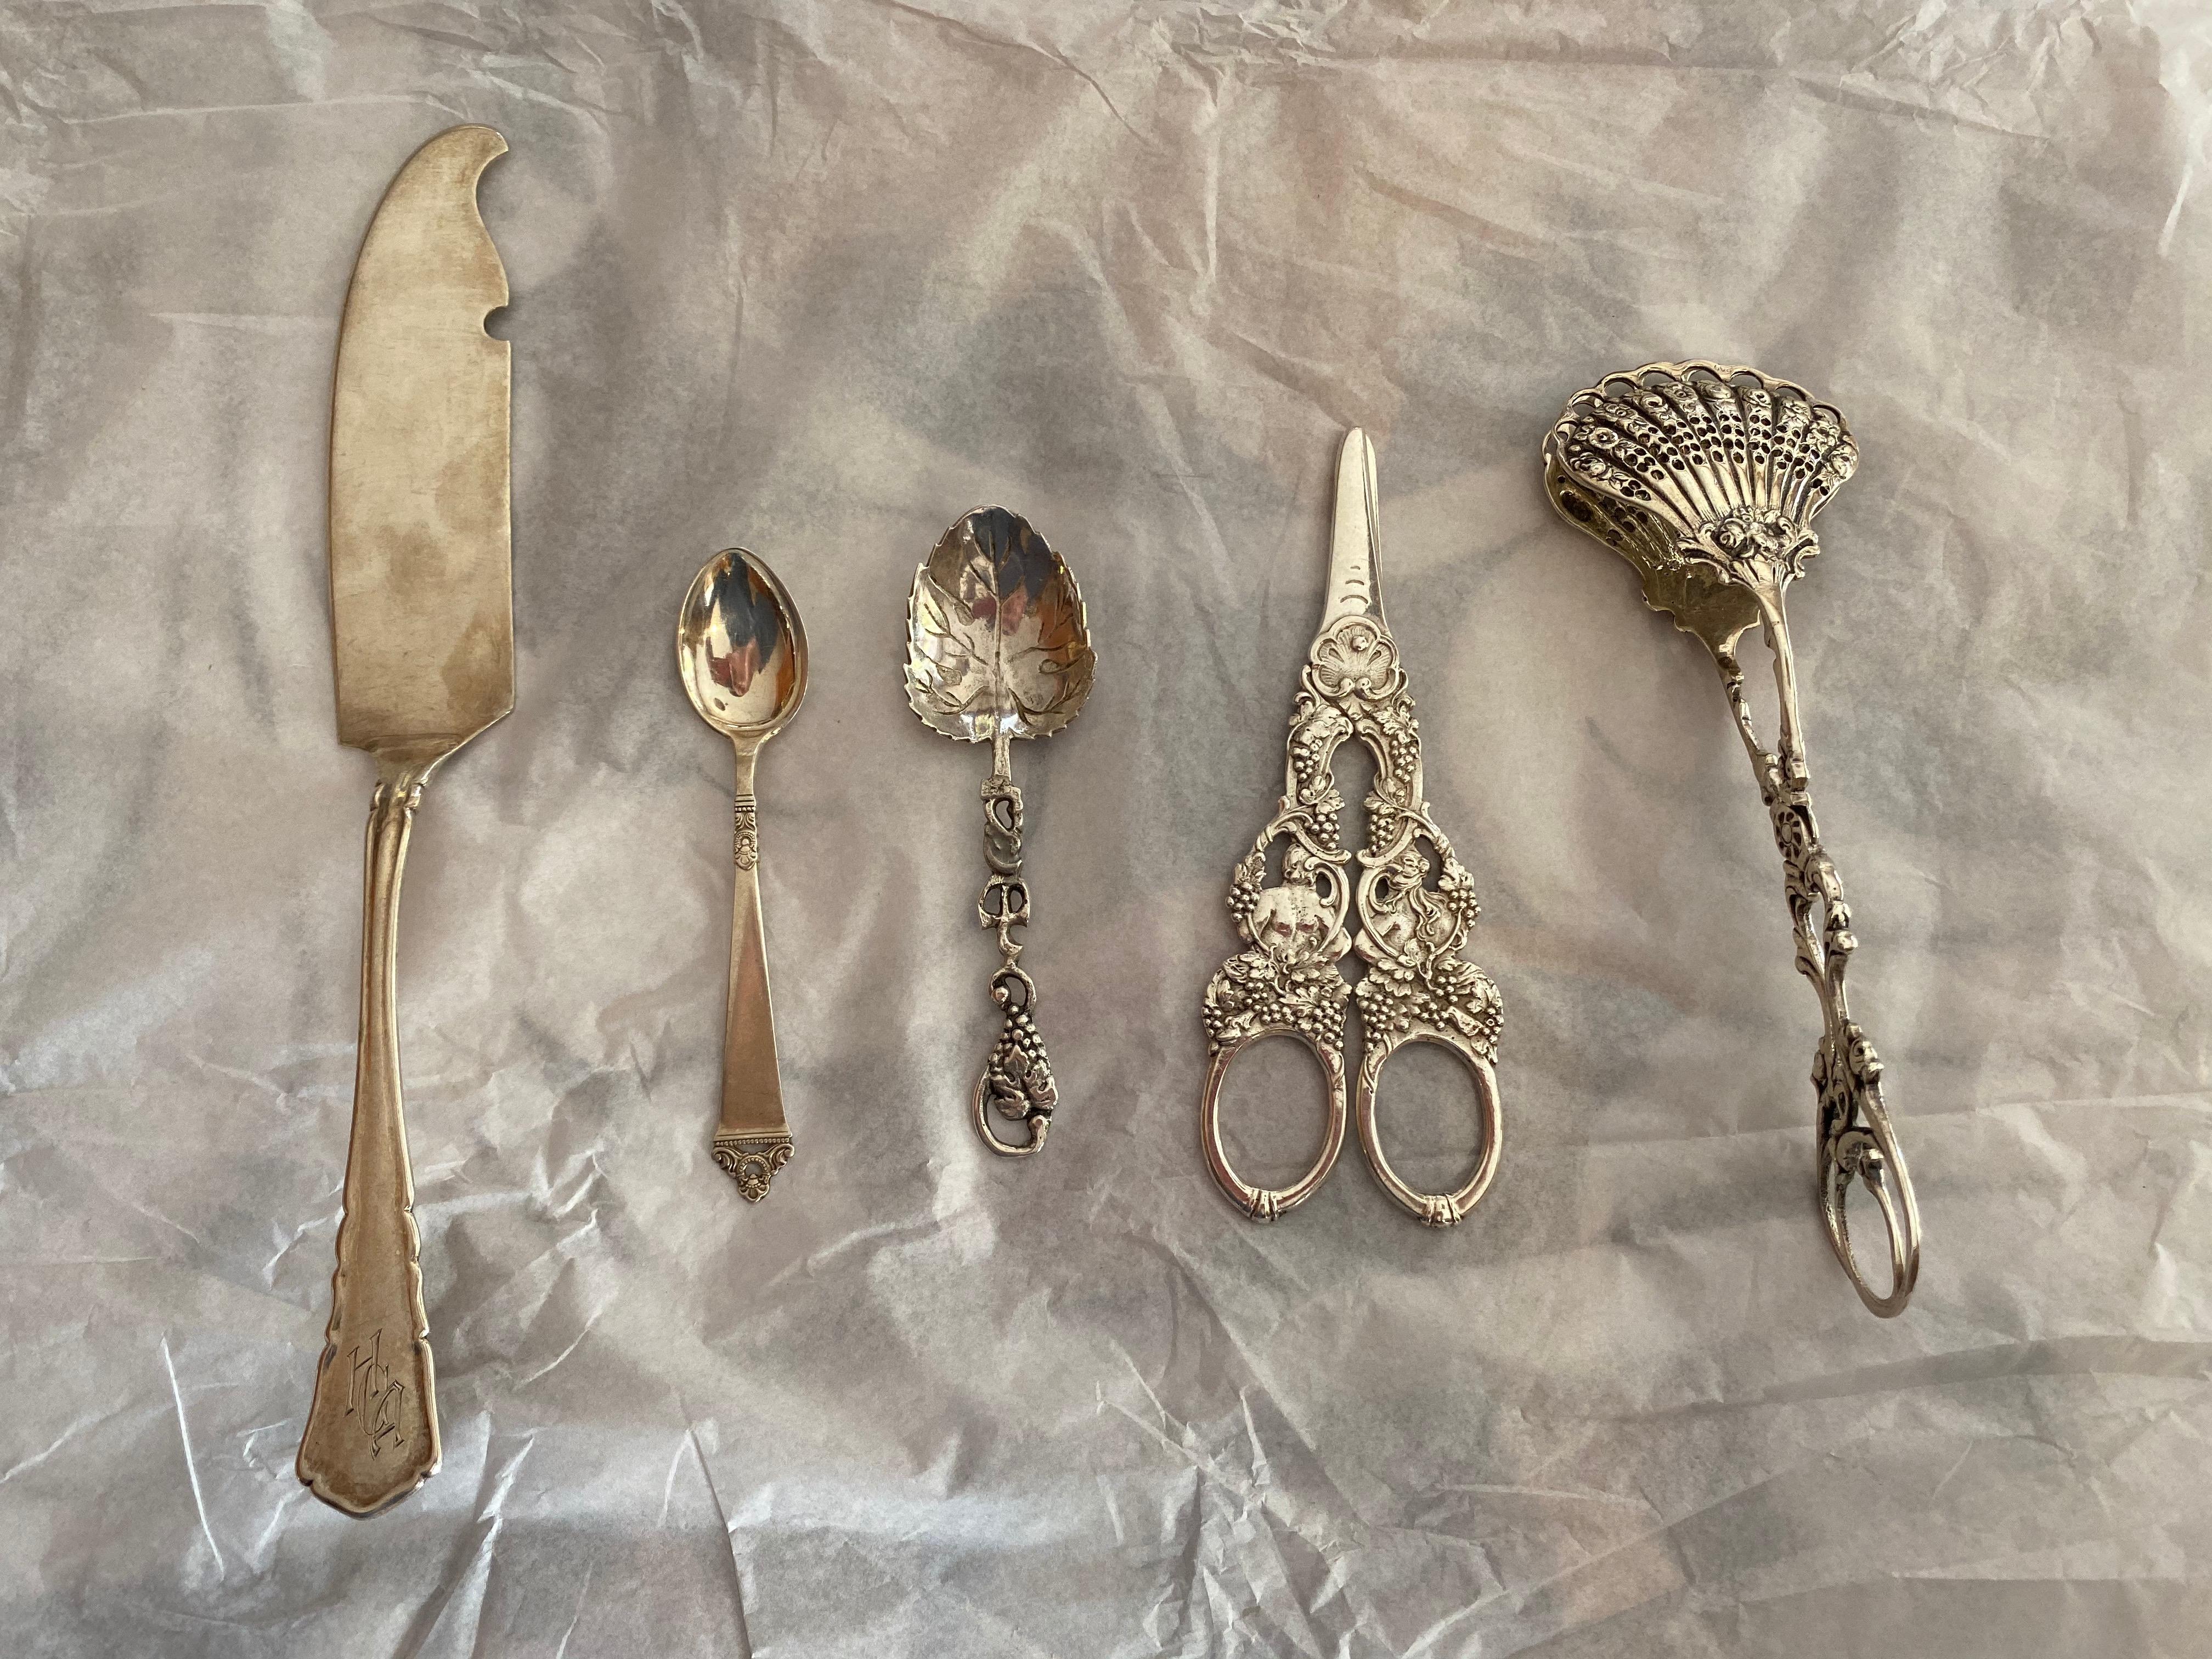 Group of five continental silver serving pieces, comprising large fish knife, tongs, grape scissors, two spoons, including Posen.
Measures: Knife 9.5